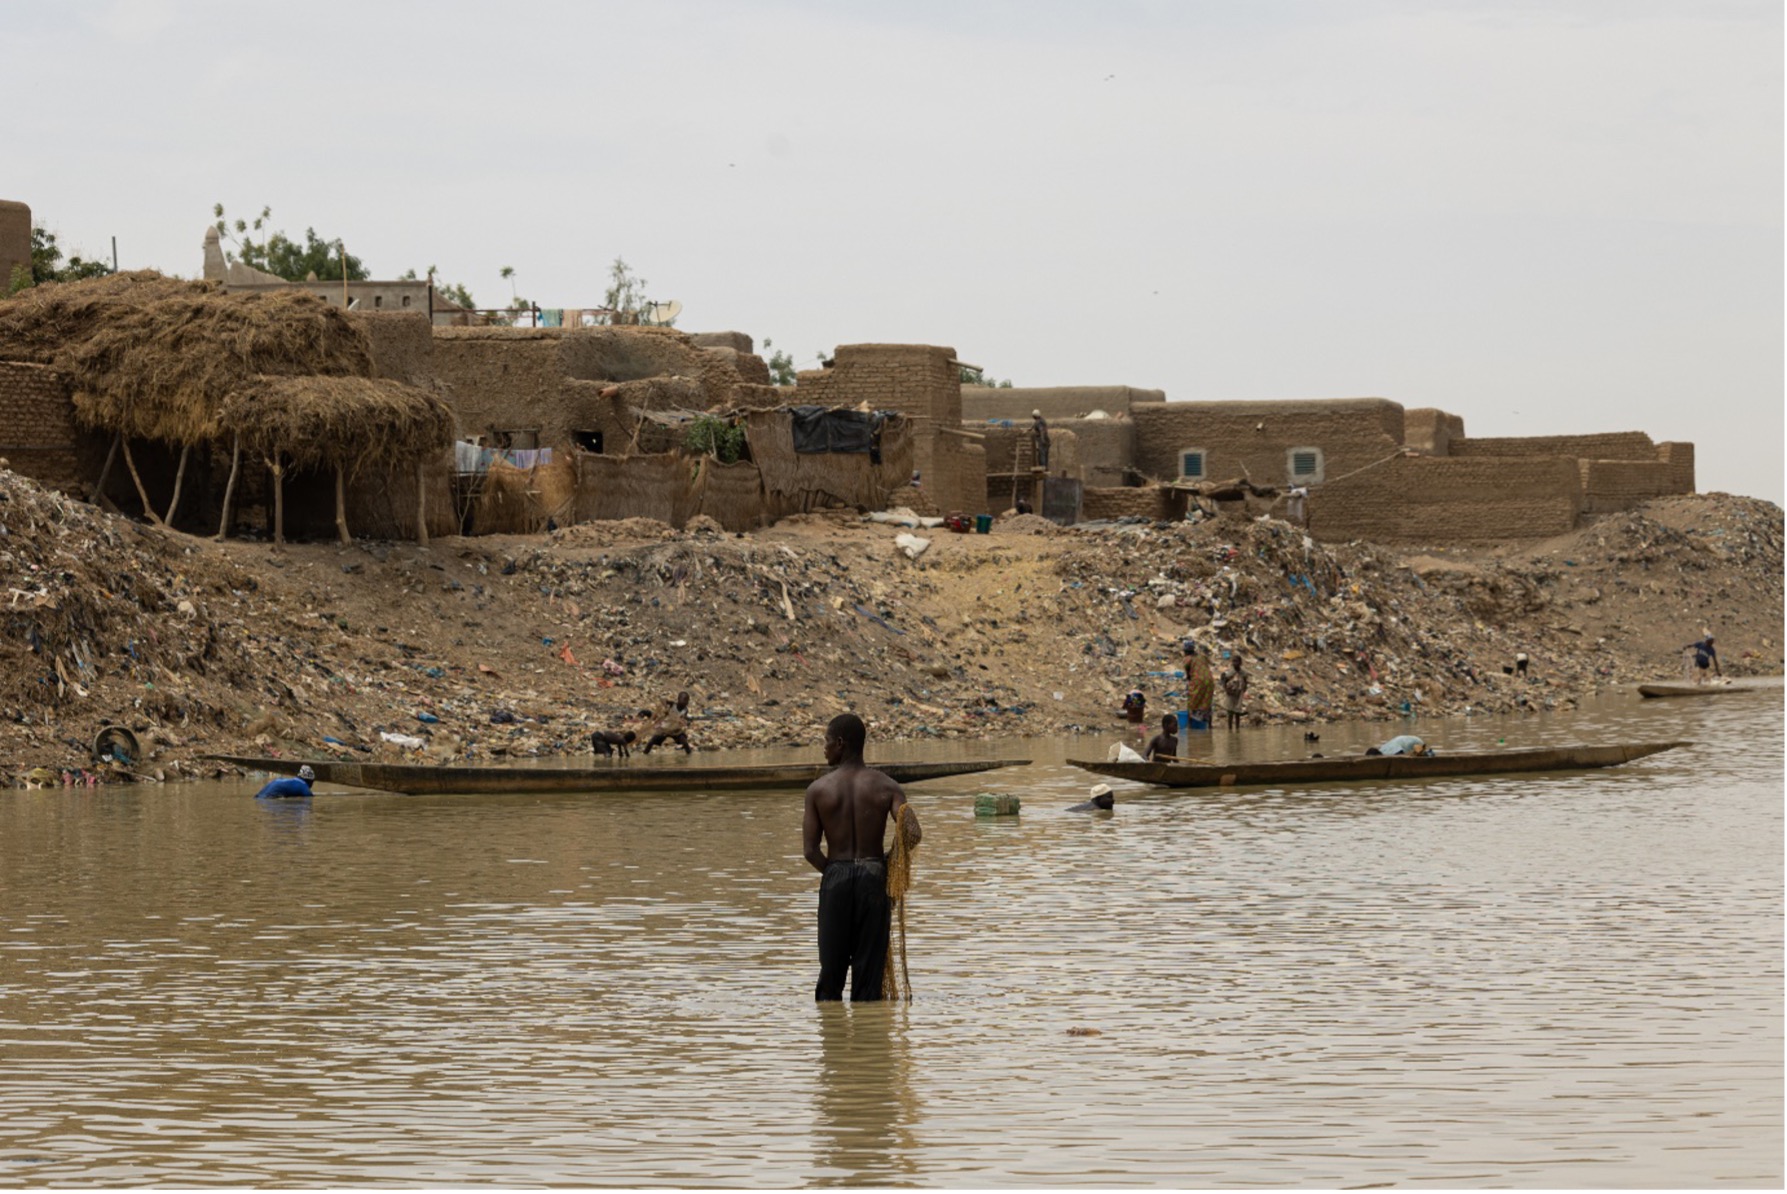 A fisherman in the Niger River in Djenné